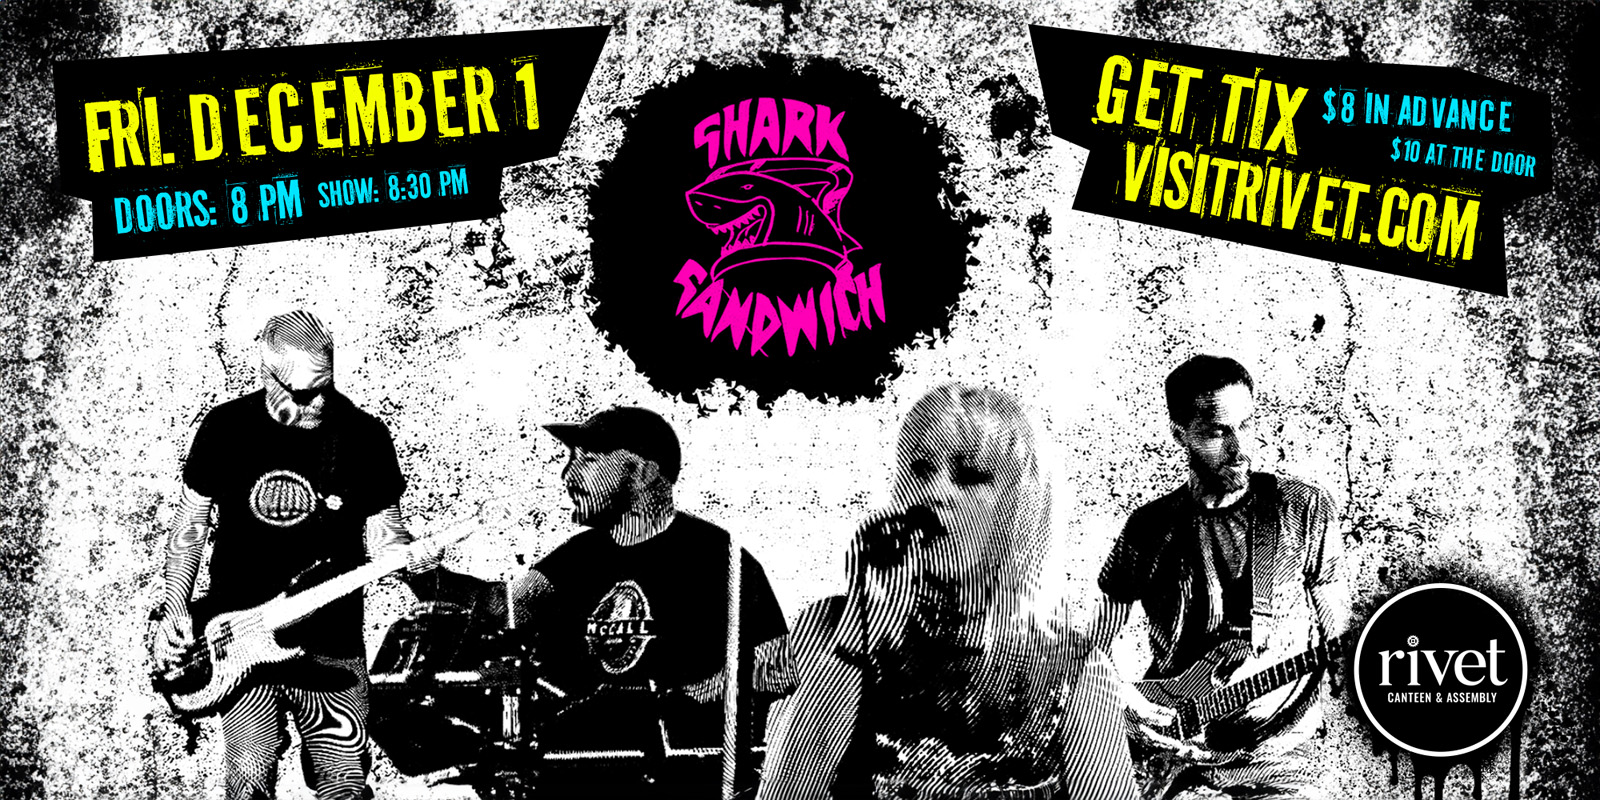 Shark Sandwich live at Rivet: Canteen & Assembly on Friday, December 1st. Be there!